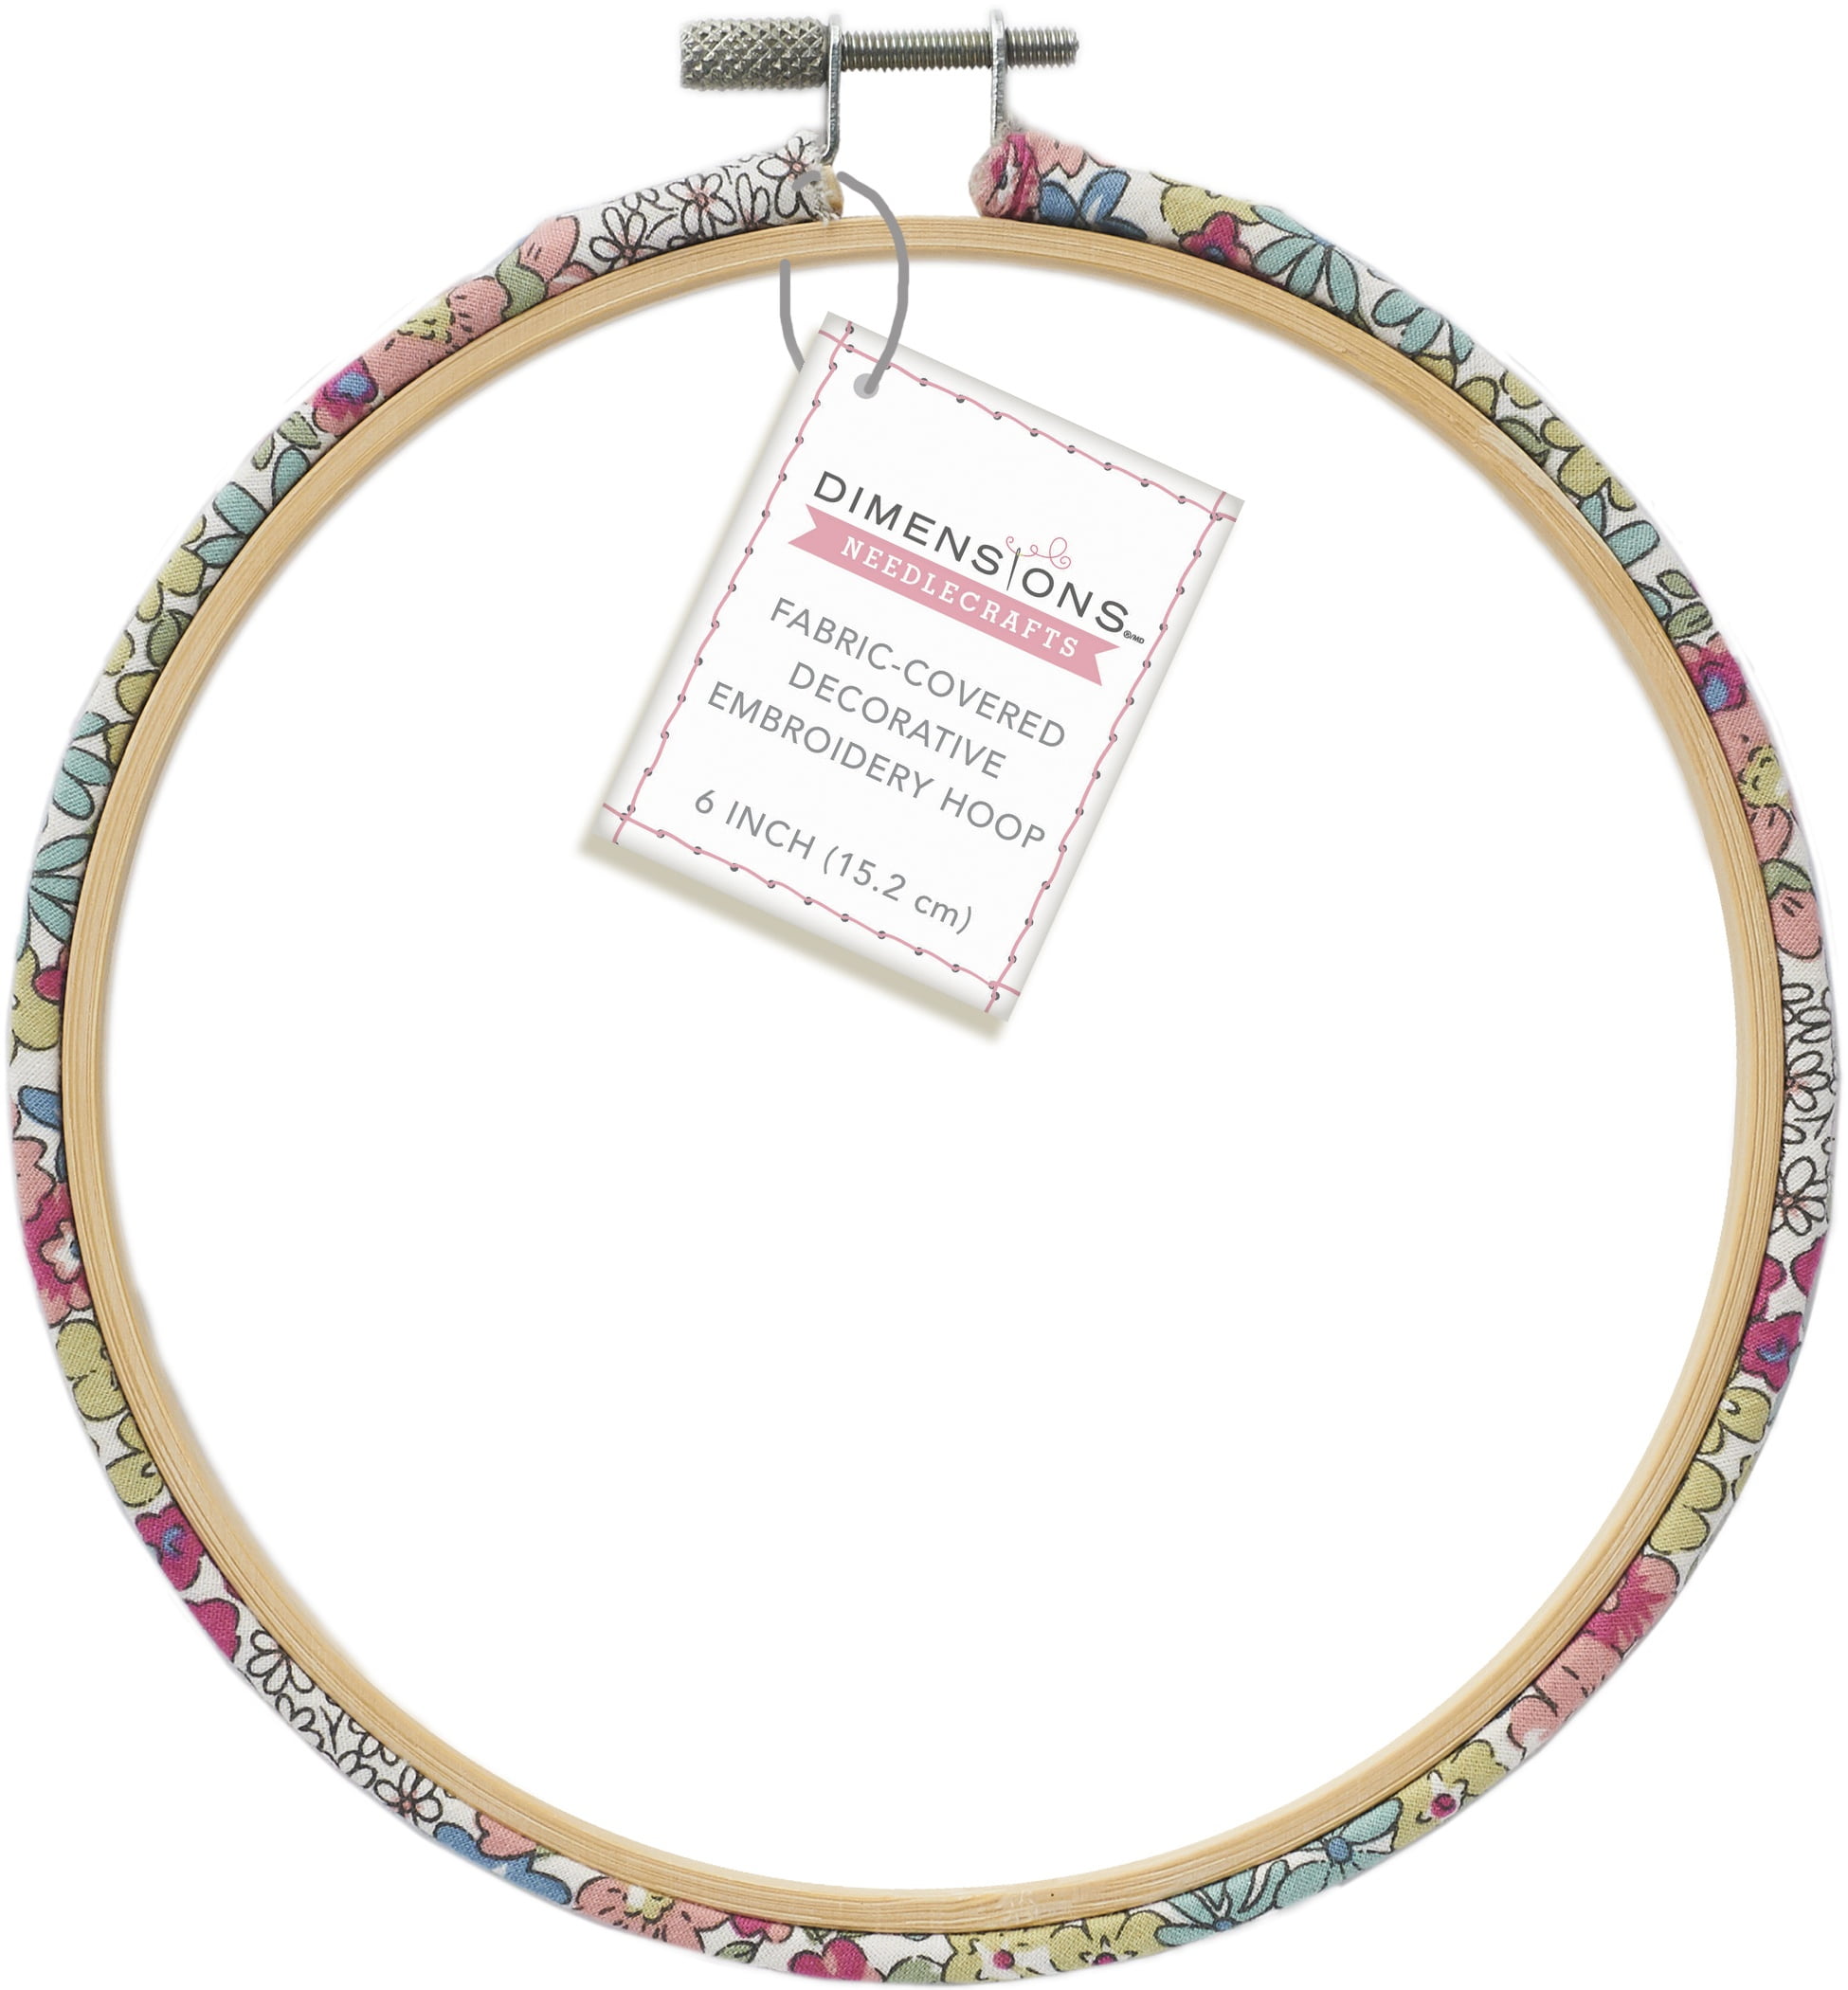 Uxcell Rubber Oval Embroidery Hoop Frame Cross-Stitch Art Craft